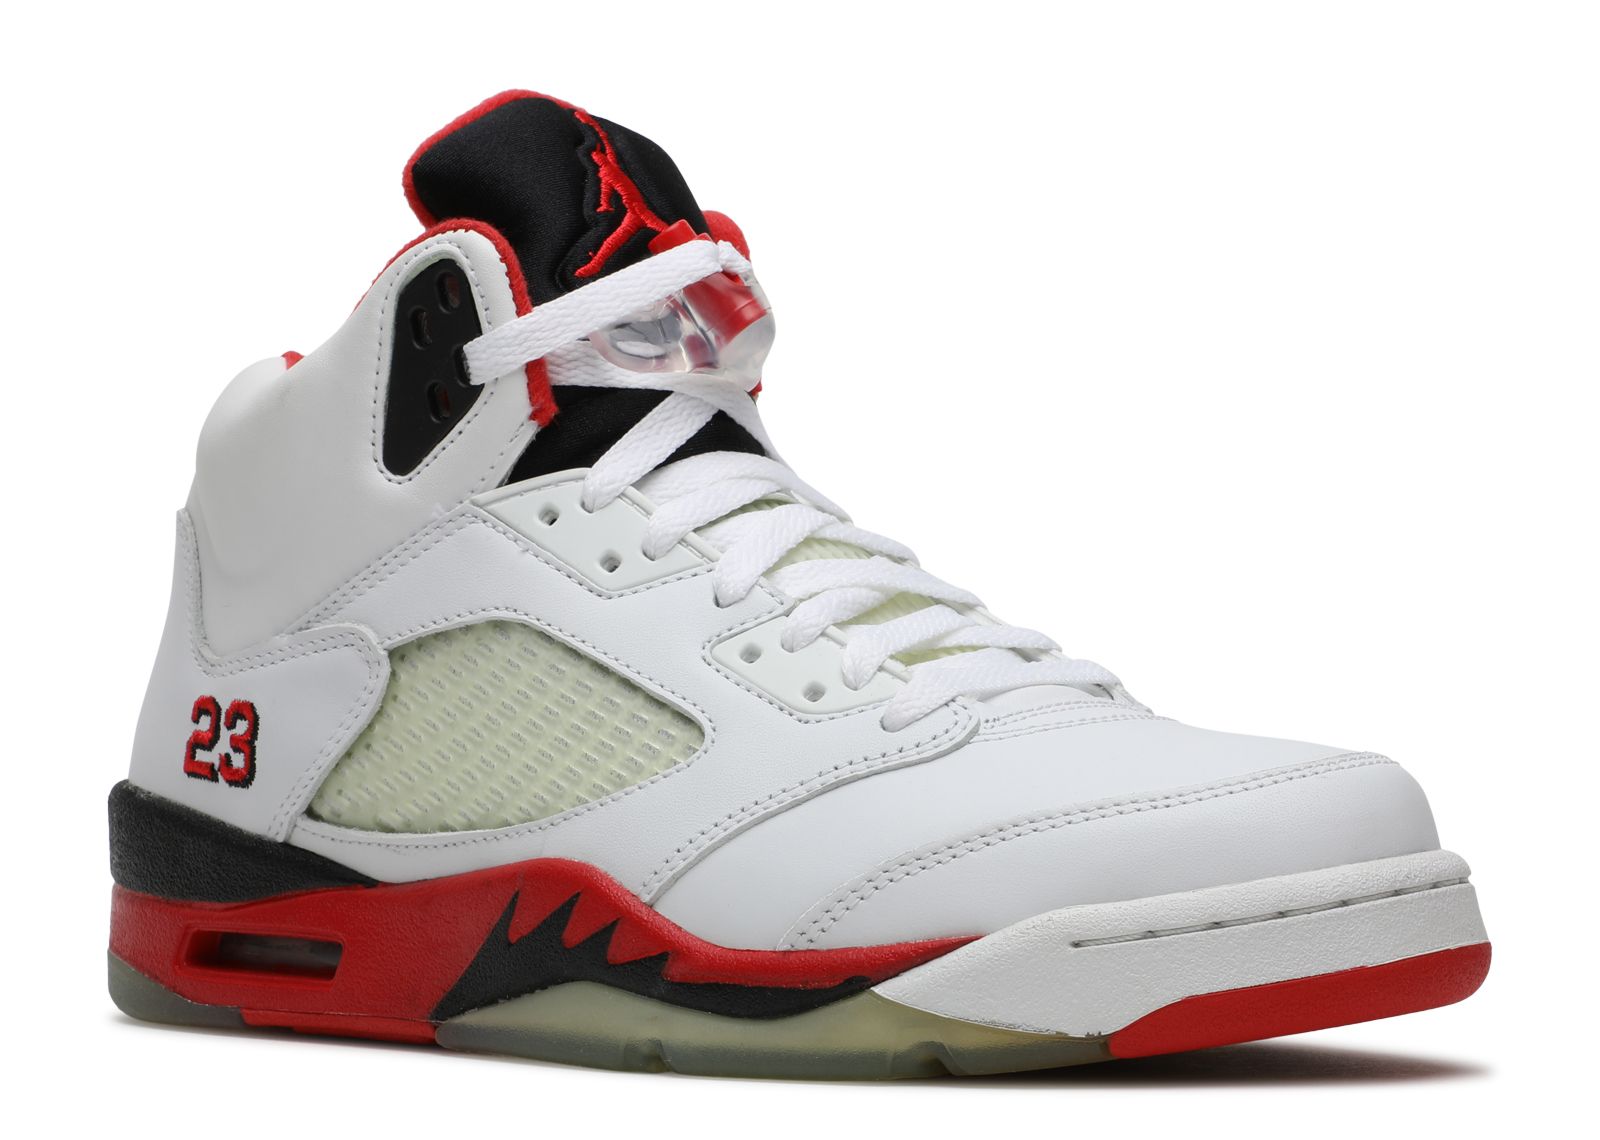 the fire red 5s